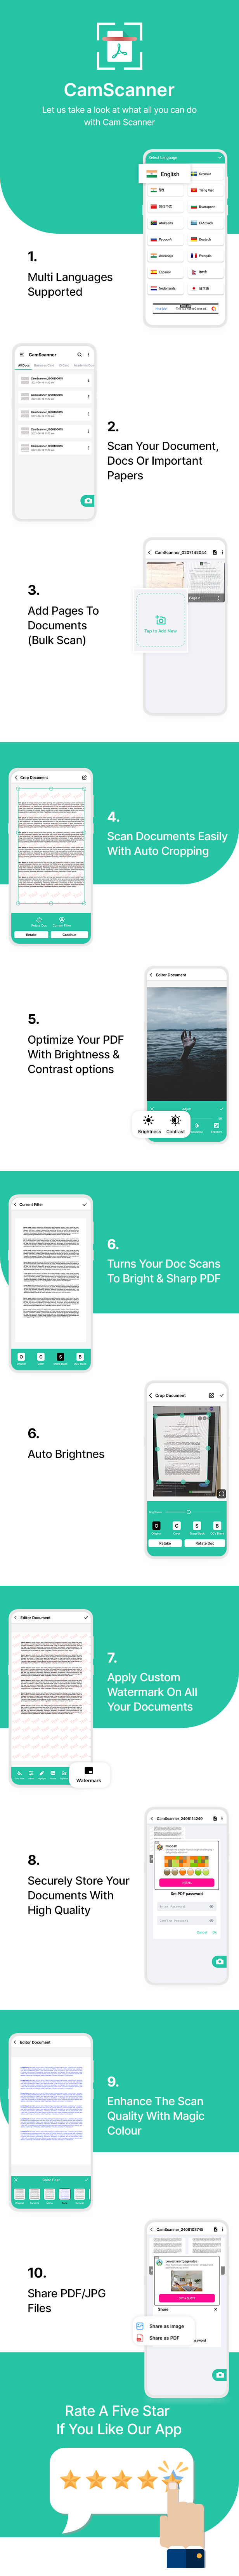 Cam Scanner - Android App with Admob Ads - 6